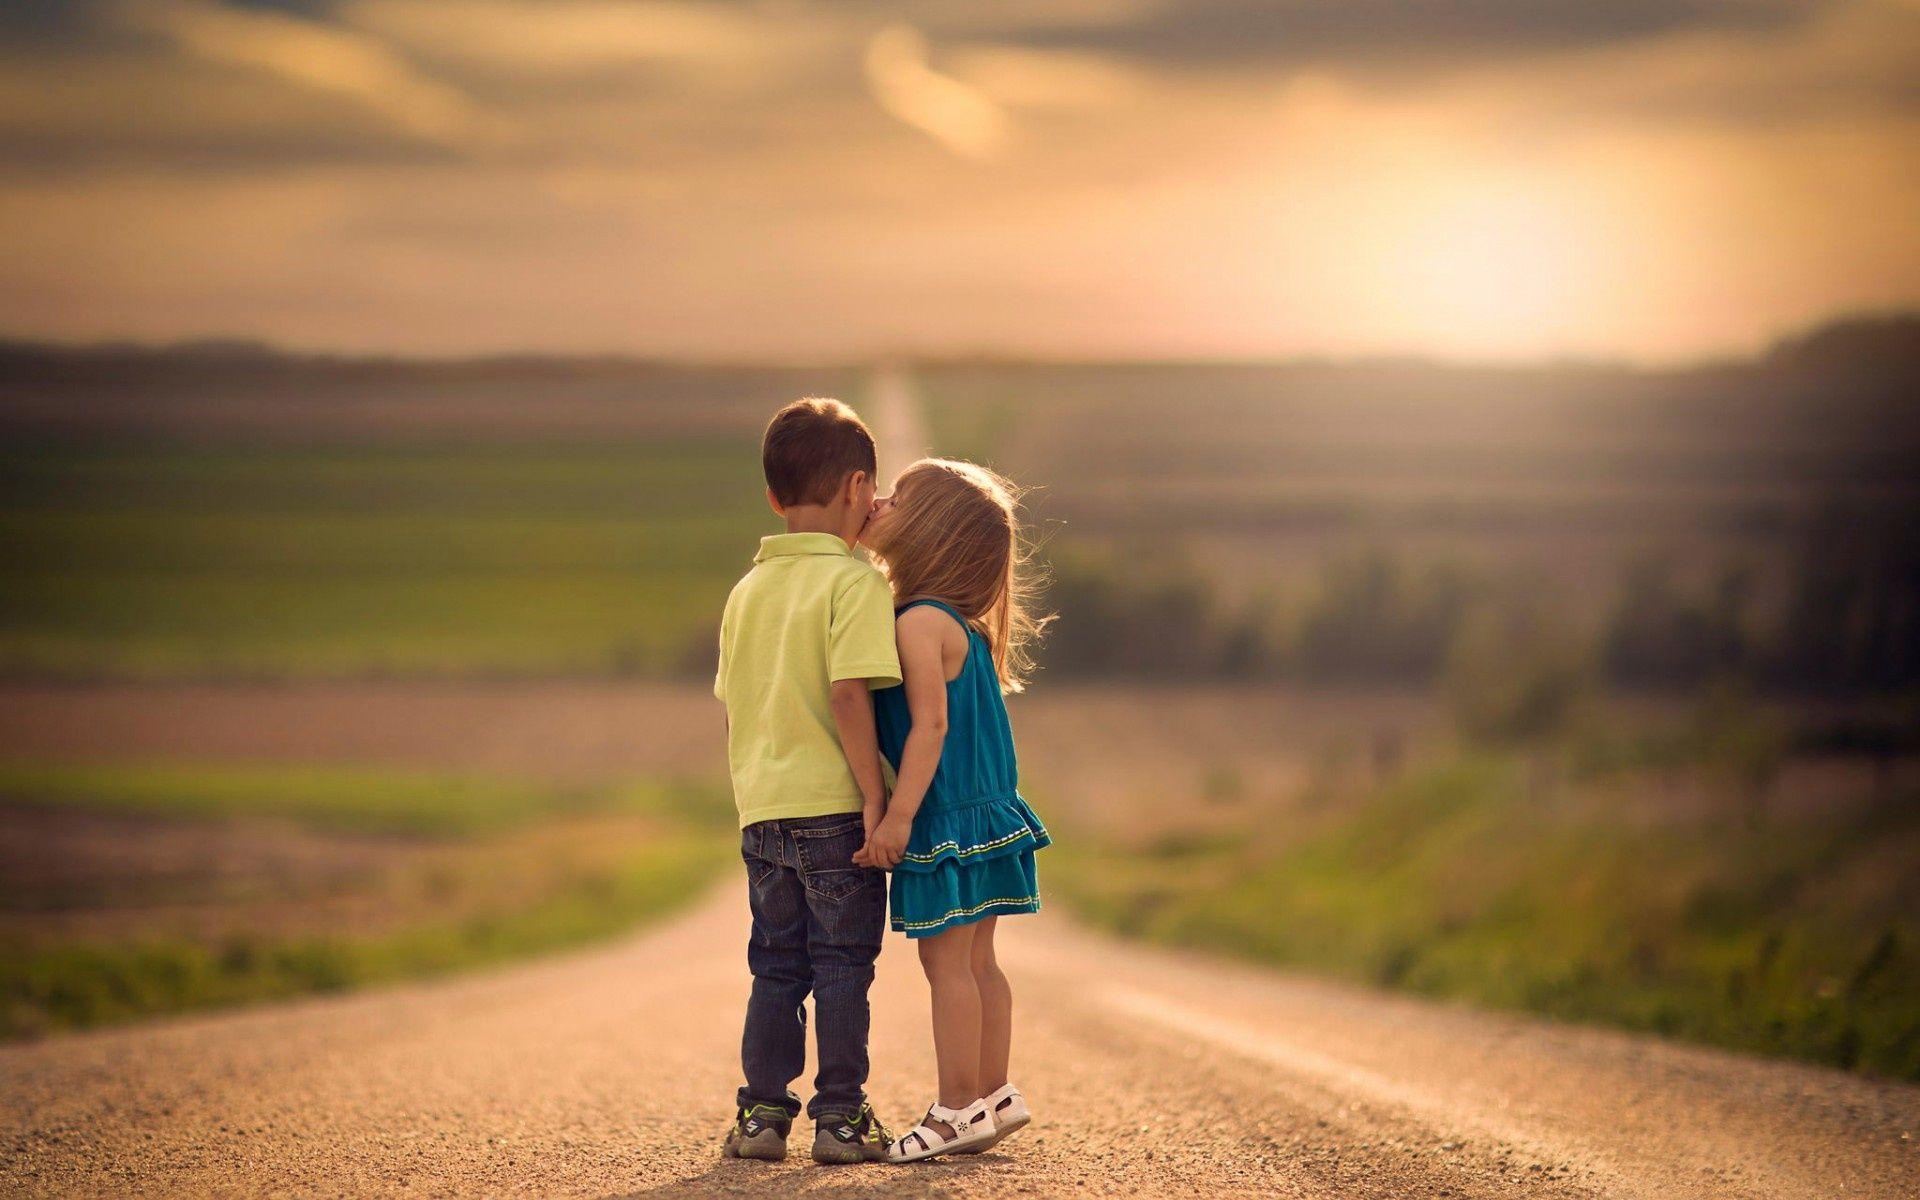 Find out: Little Boy Girl Kiss on Road wallpaper